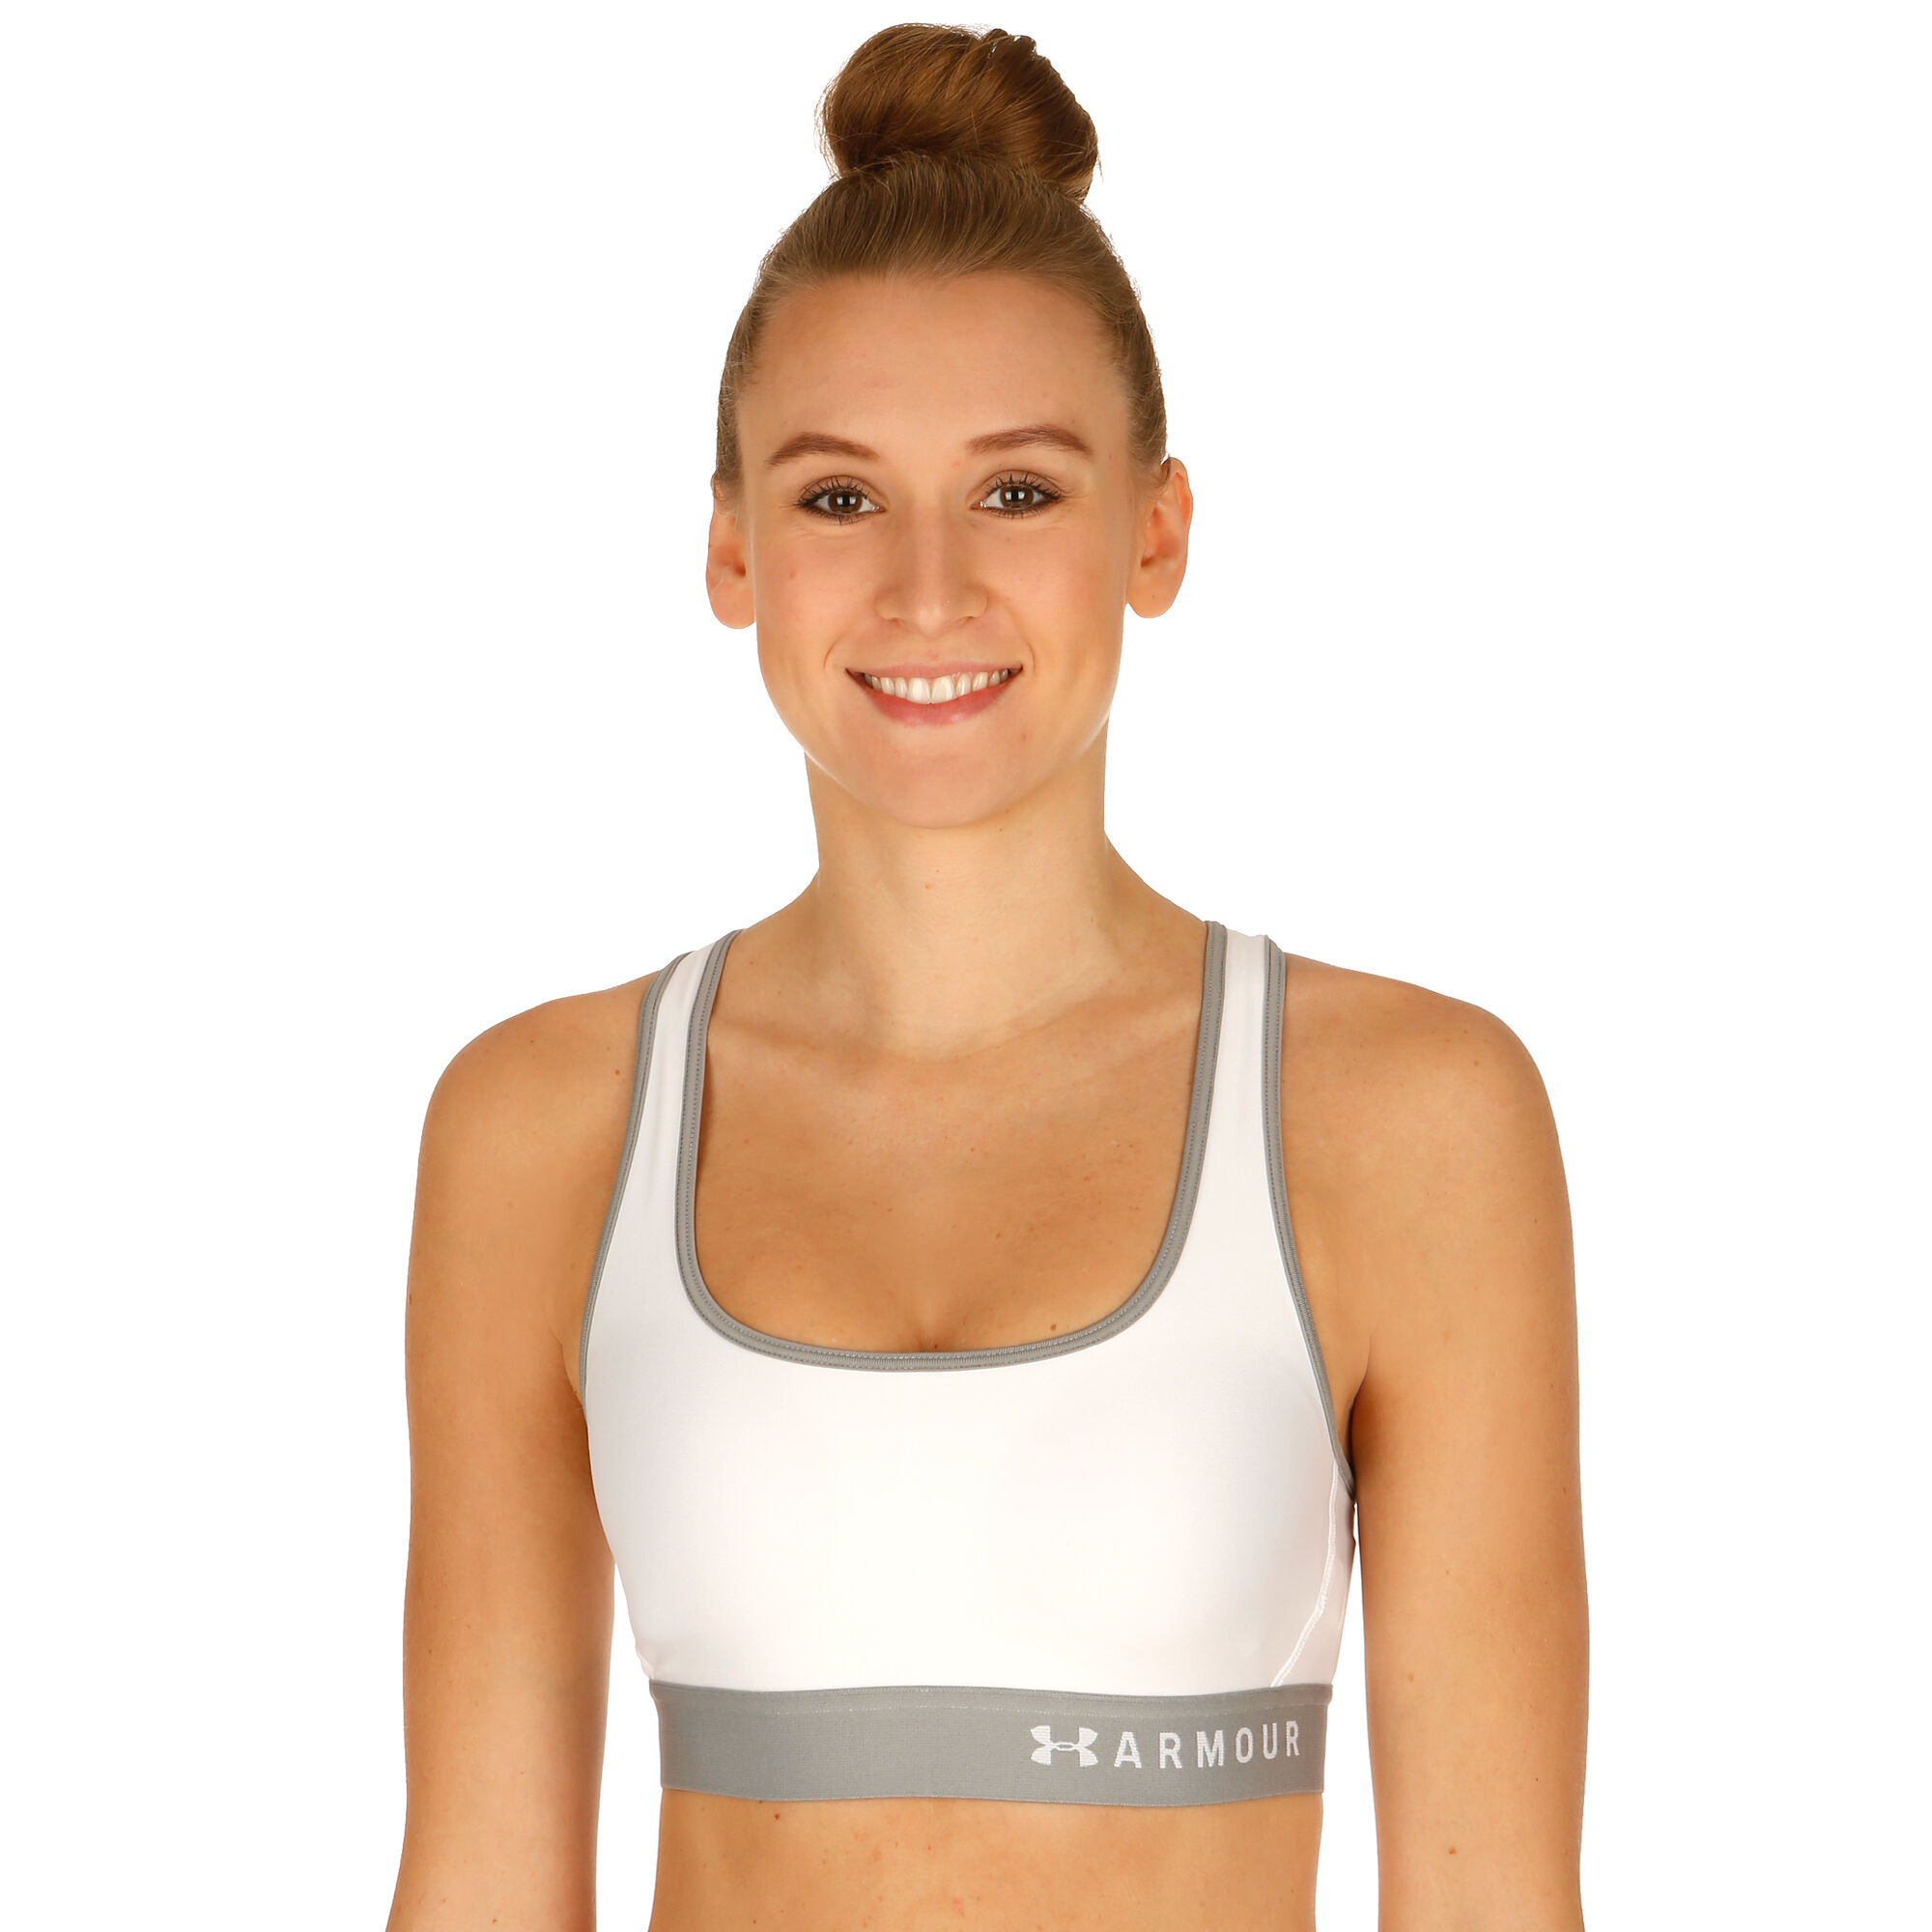 Purchase the Under Armour Sports Bra Mid Crossback white by ASMC